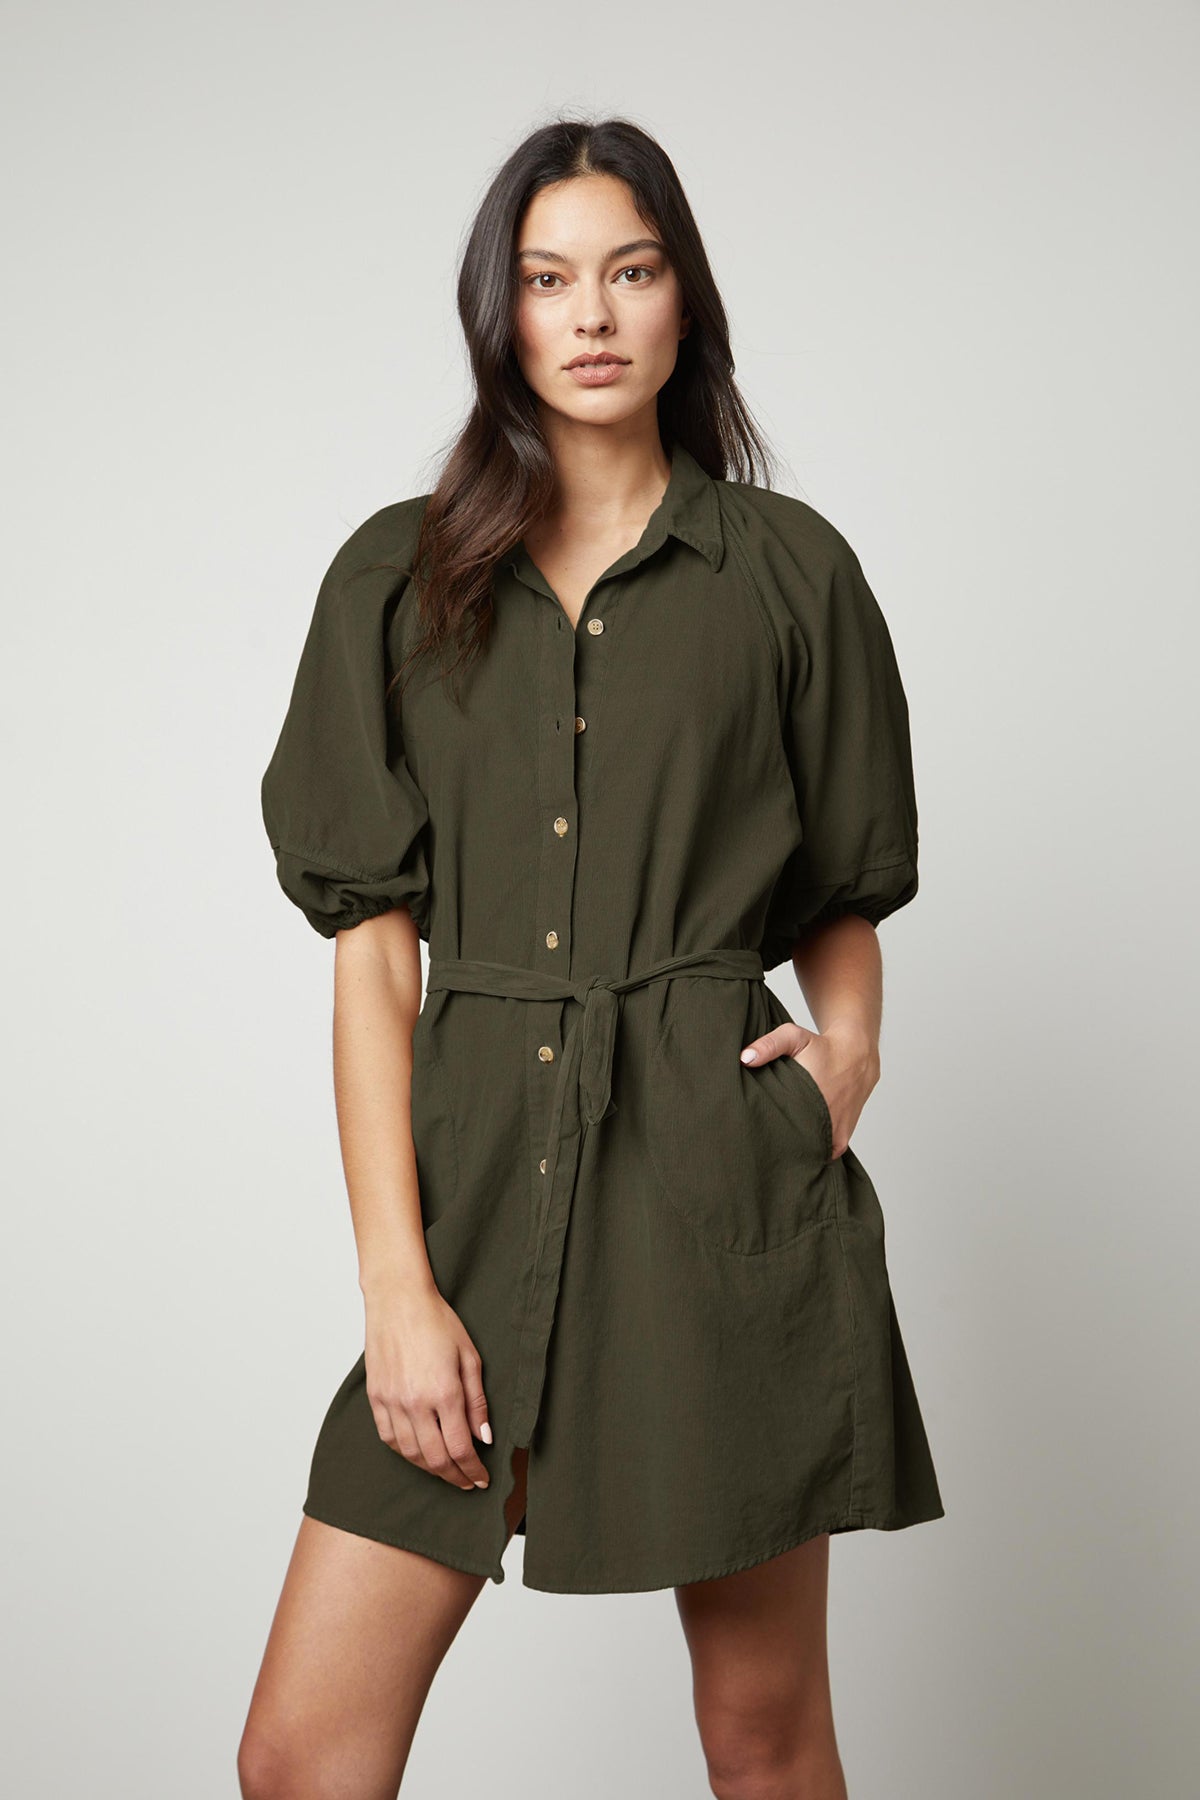 The KADY CORDUROY BUTTON-UP DRESS in olive green is a versatile everyday wear dress made of cotton corduroy by Velvet by Graham & Spencer.-26921328640193